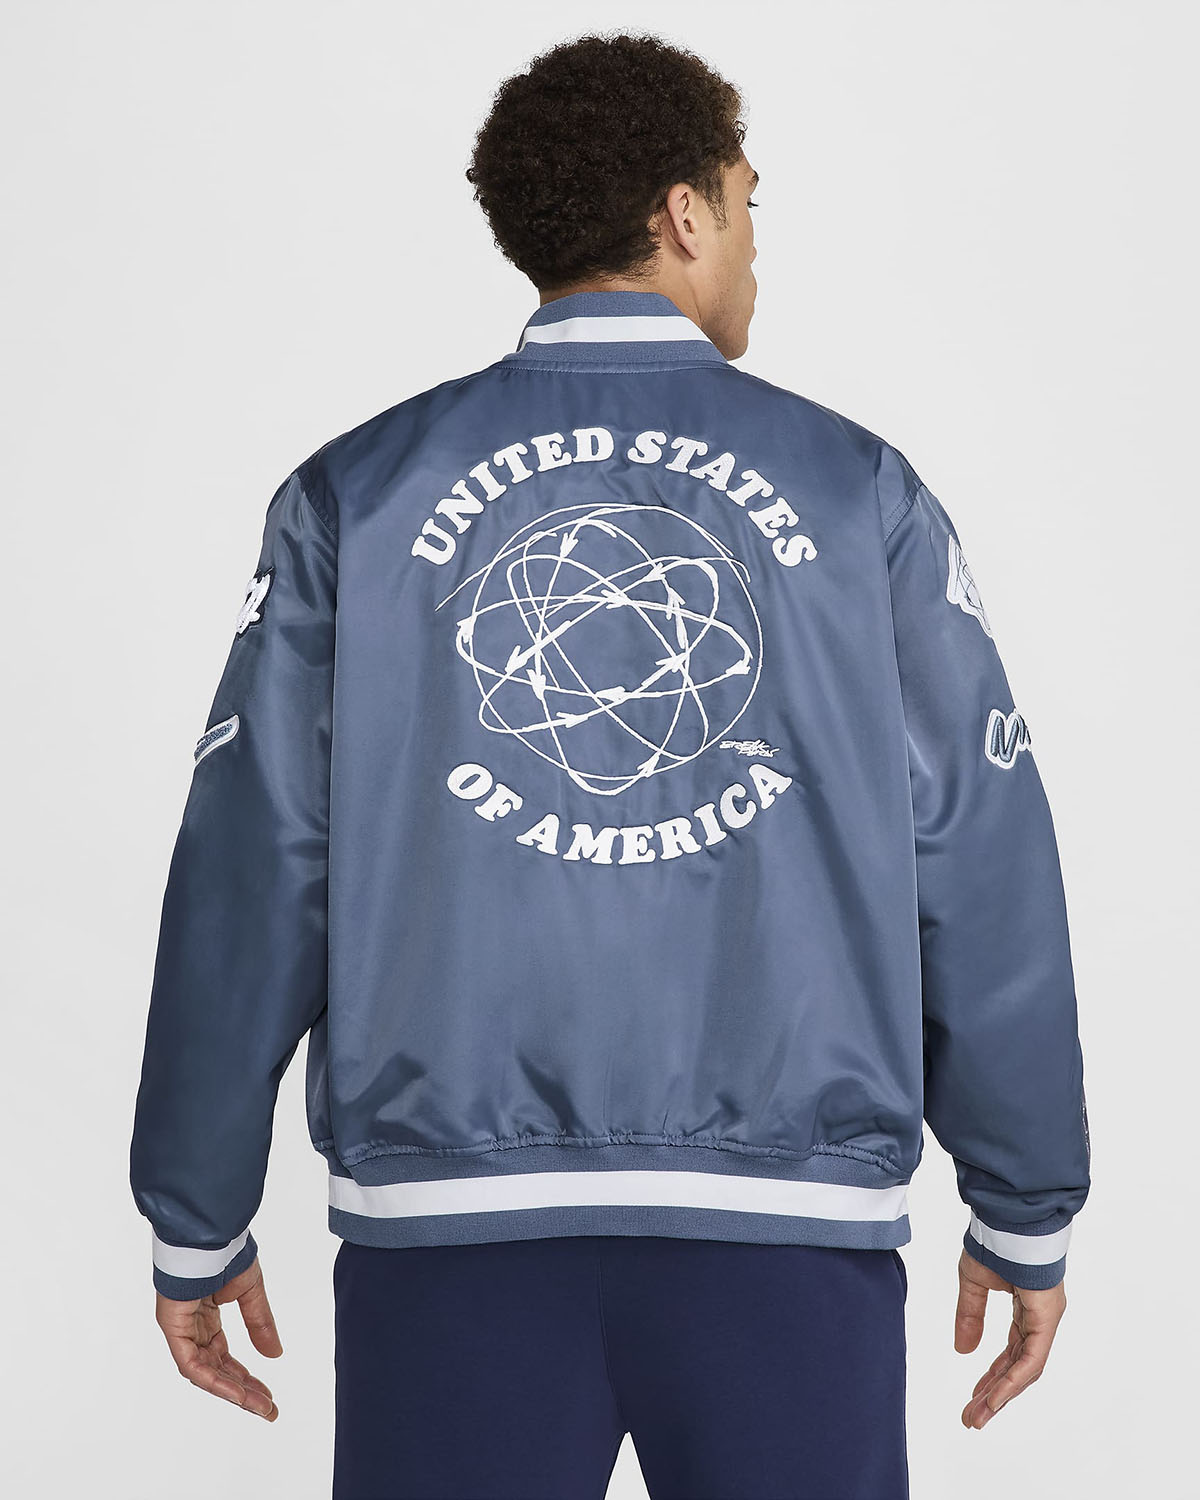 NIke USA Breaking Dugout Satin Jacket Diffused Blue 2